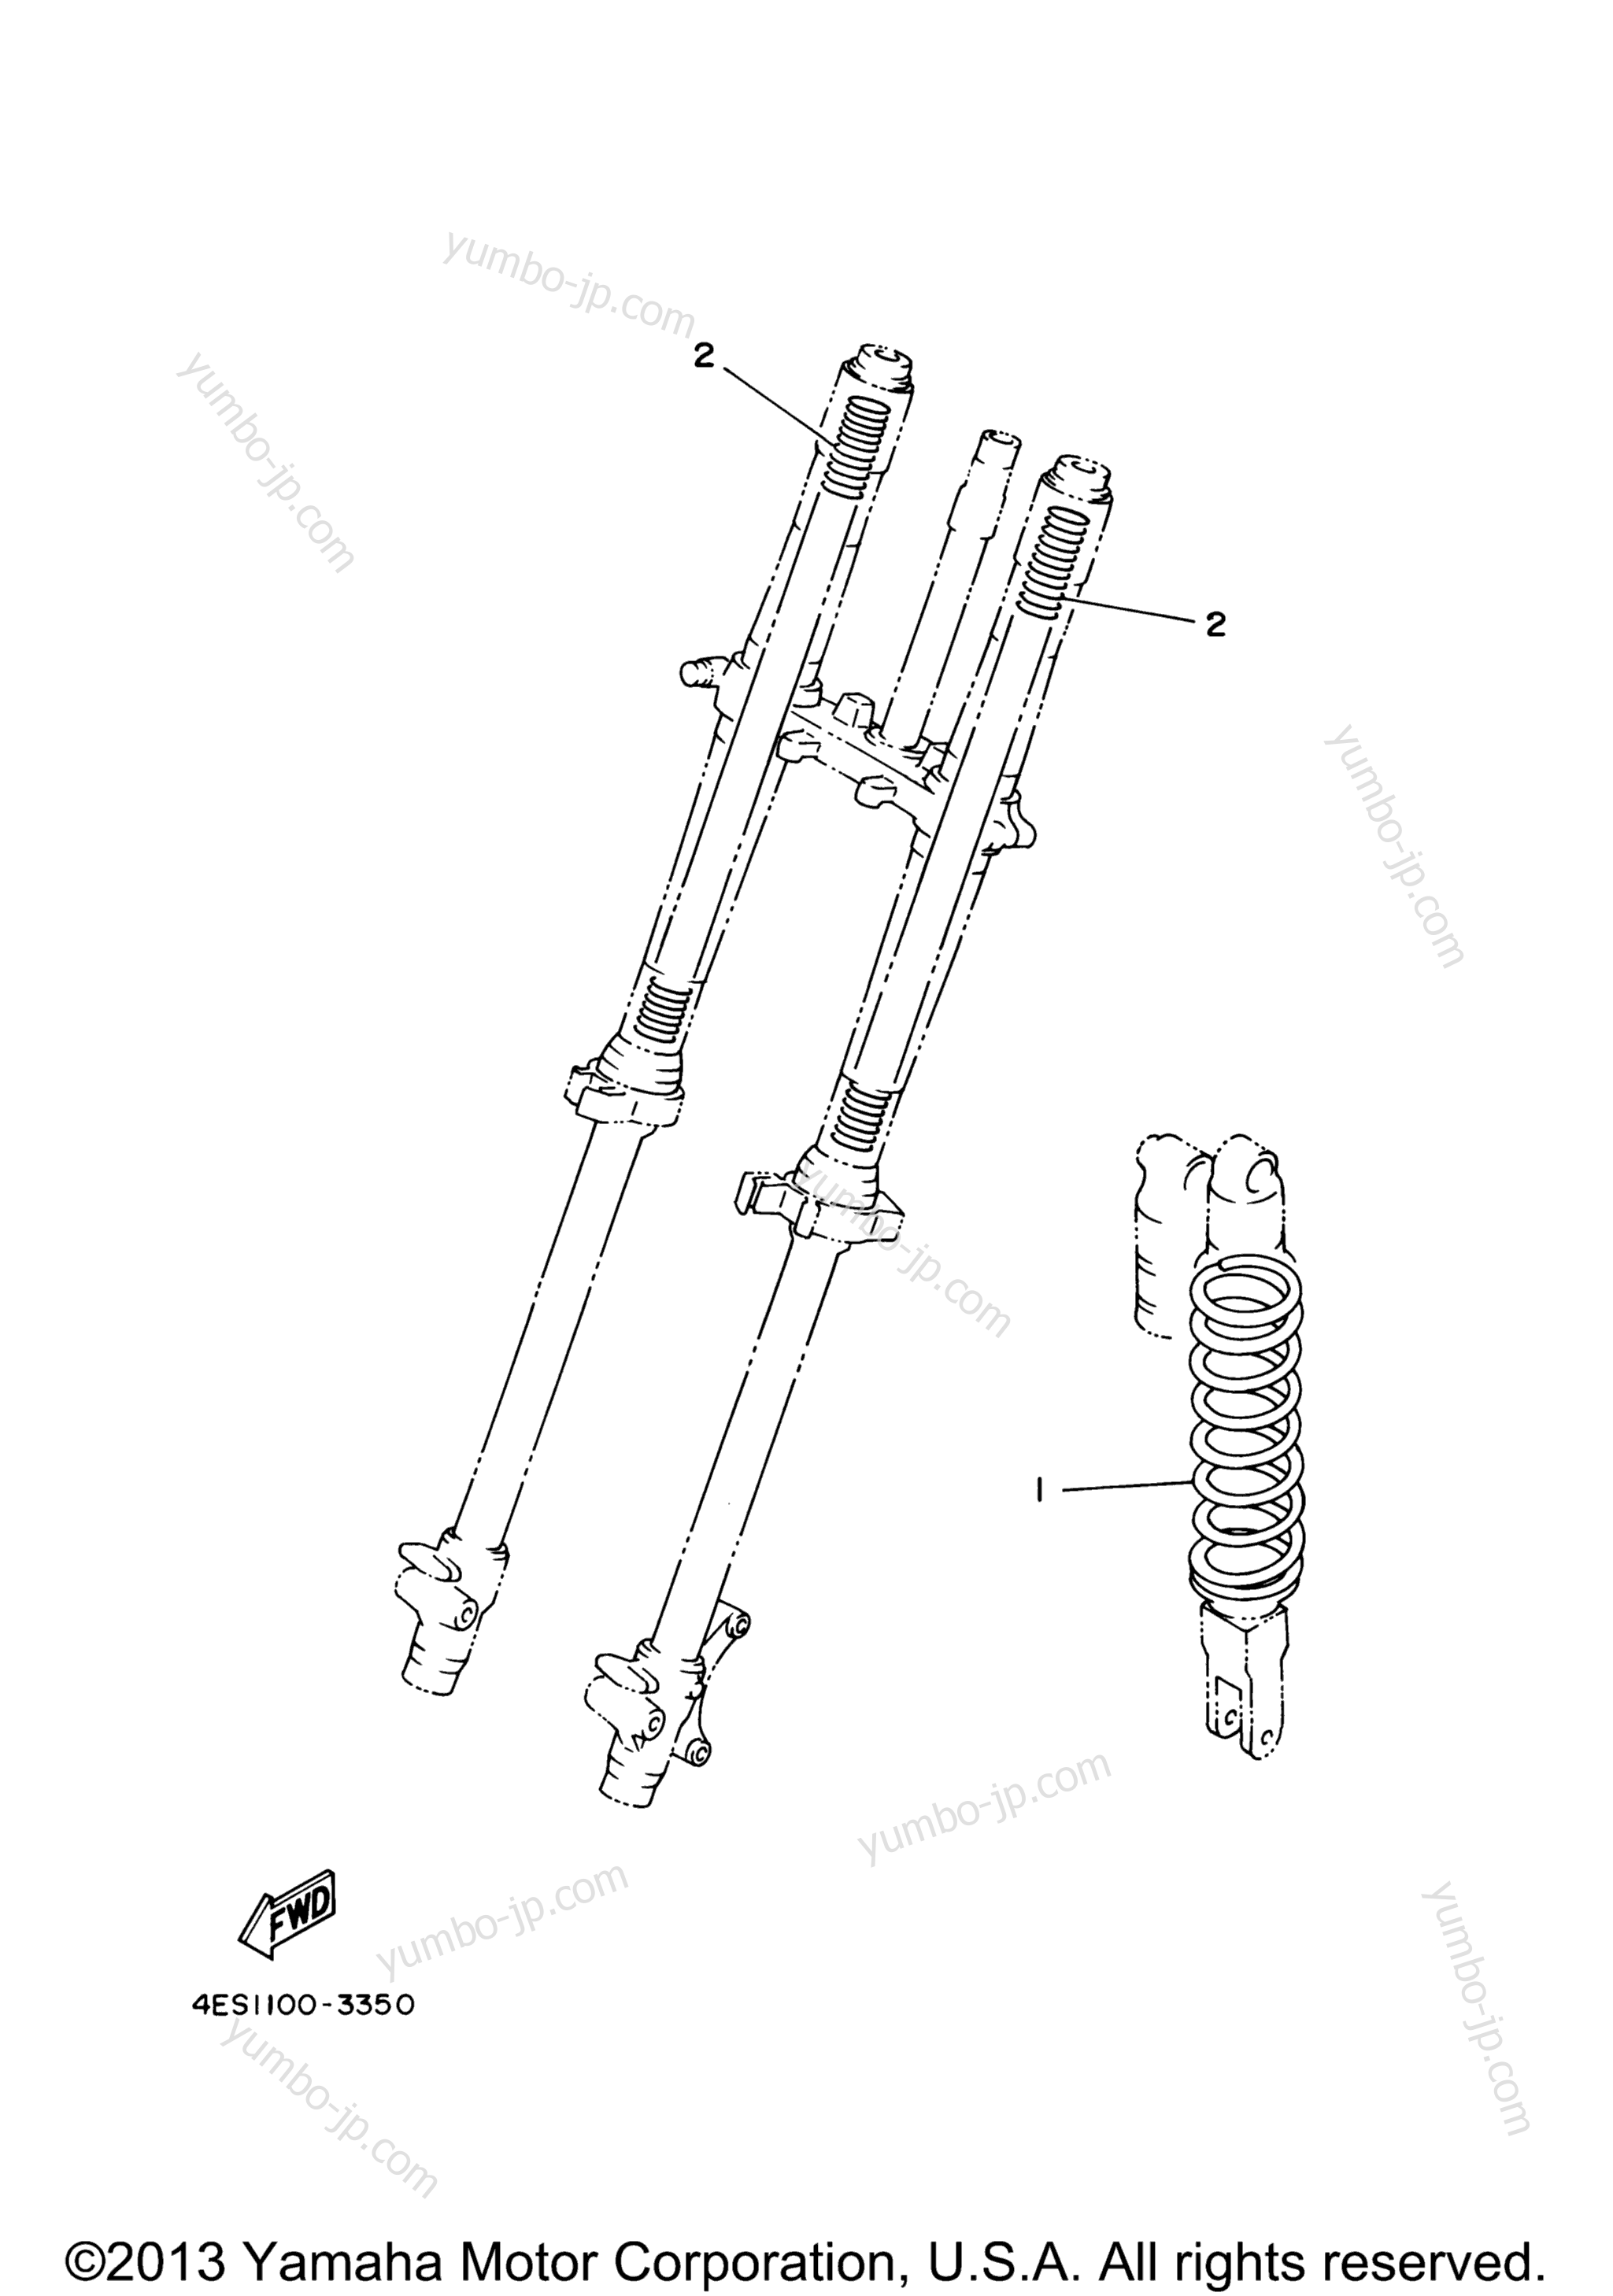 Alternate (Chassis) for motorcycles YAMAHA YZ80 (YZ80M1) 2000 year